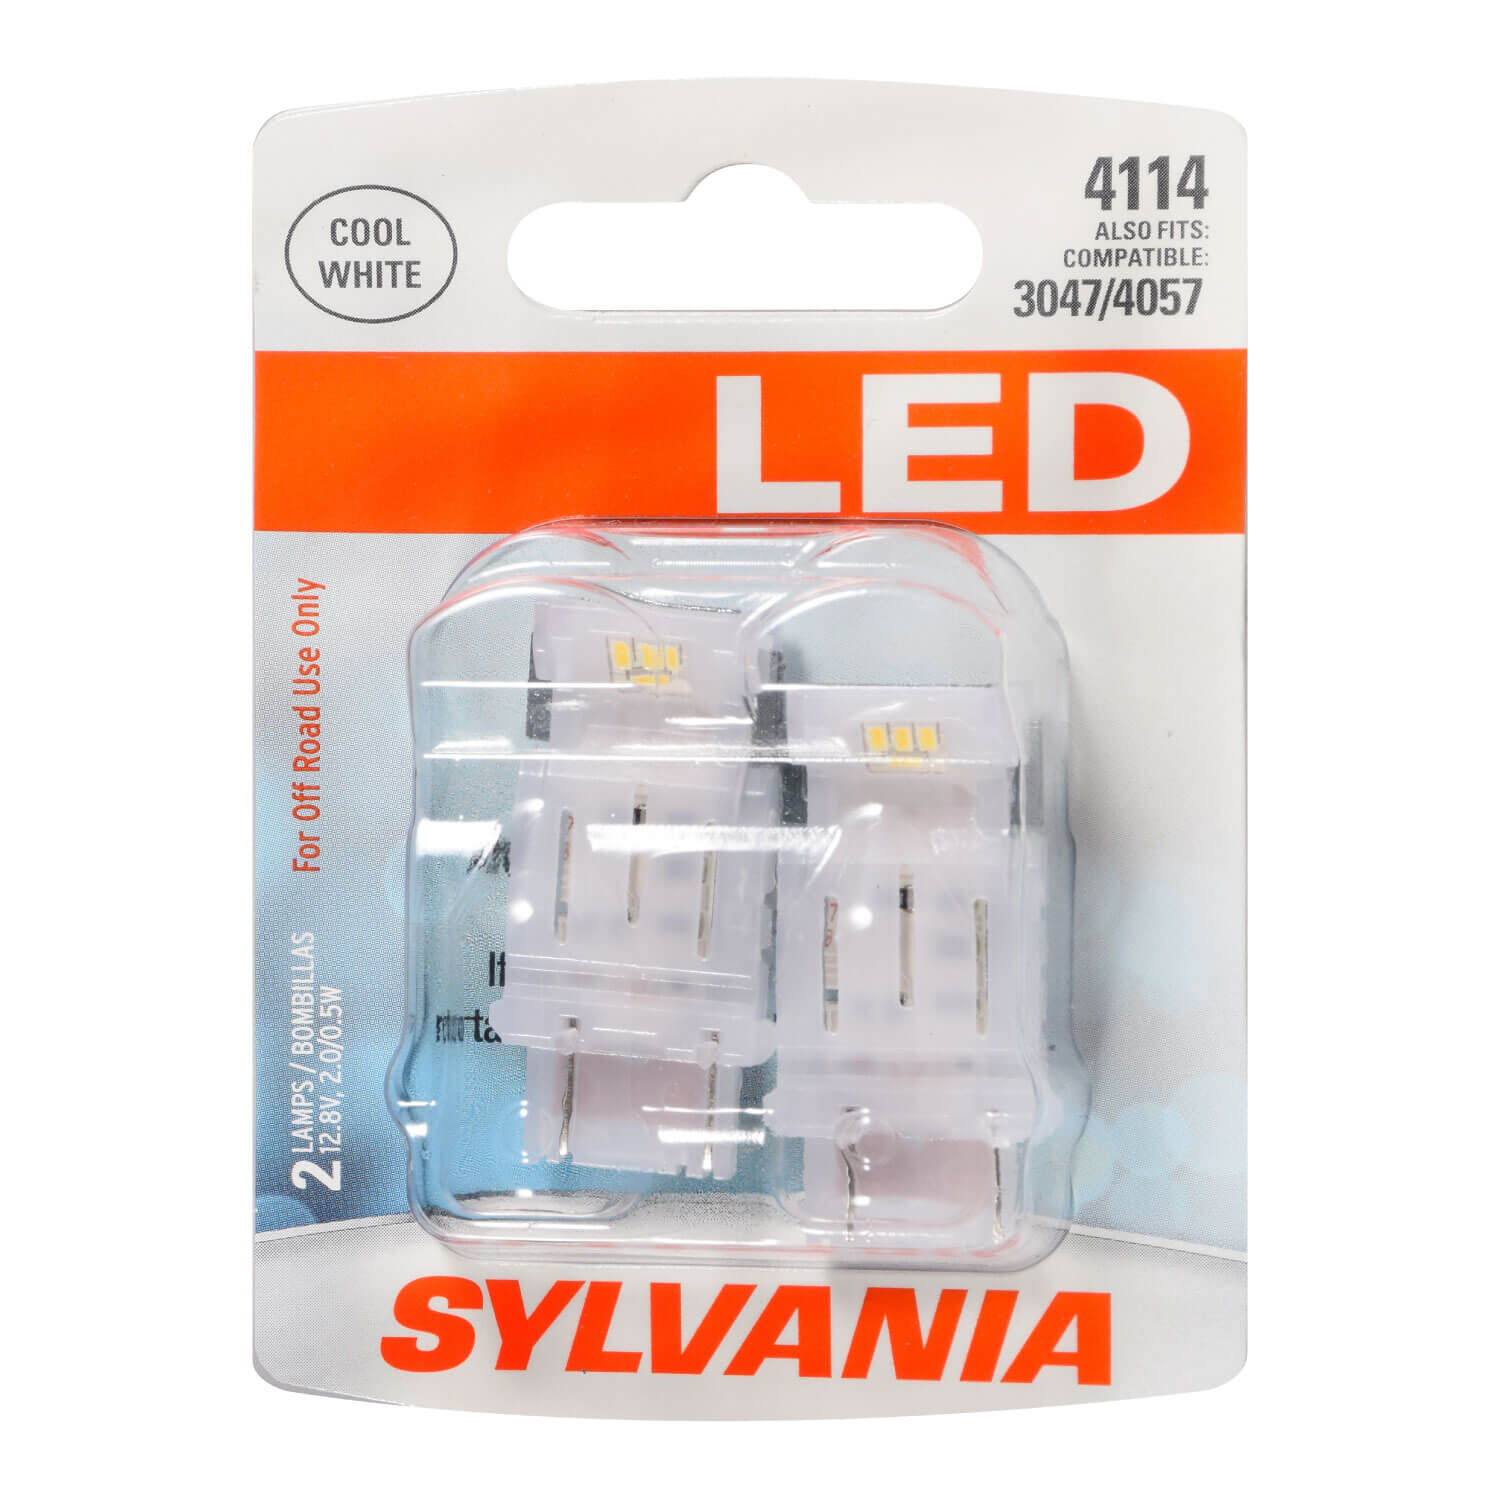 Ideal for Daytime Running Lights and Back-Up/Reverse Lights Contains 2 Bulbs 4114 ZEVO LED White Bulb SYLVANIA Bright LED Bulb DRL 